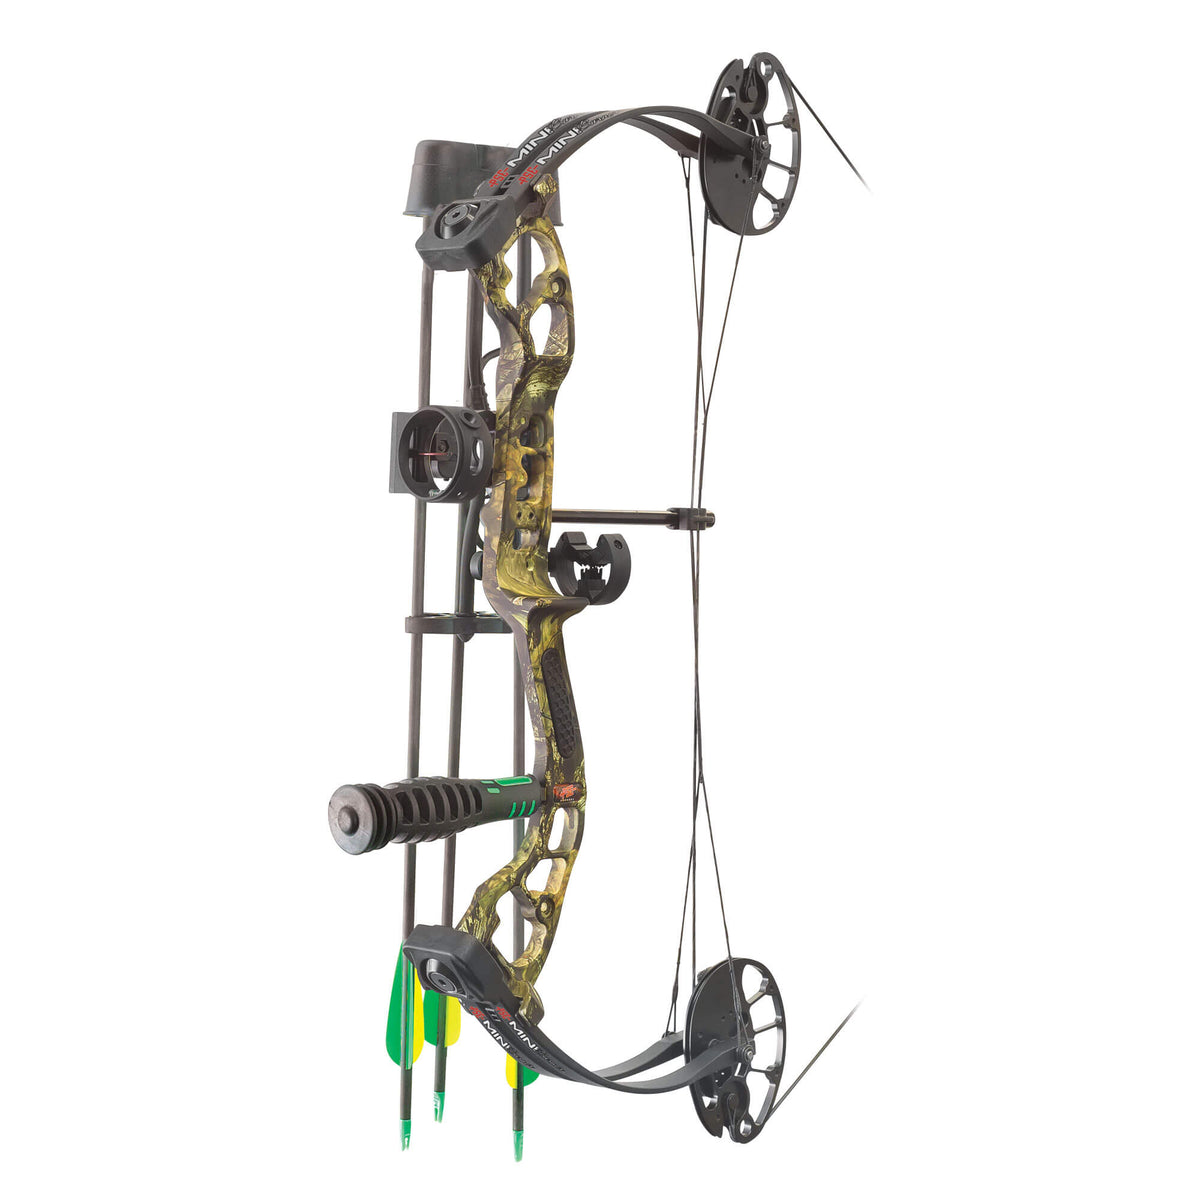 Youth Compound Bow Kit 10-30lbs Kids Junior Archery Shooting Target Sports  Gift